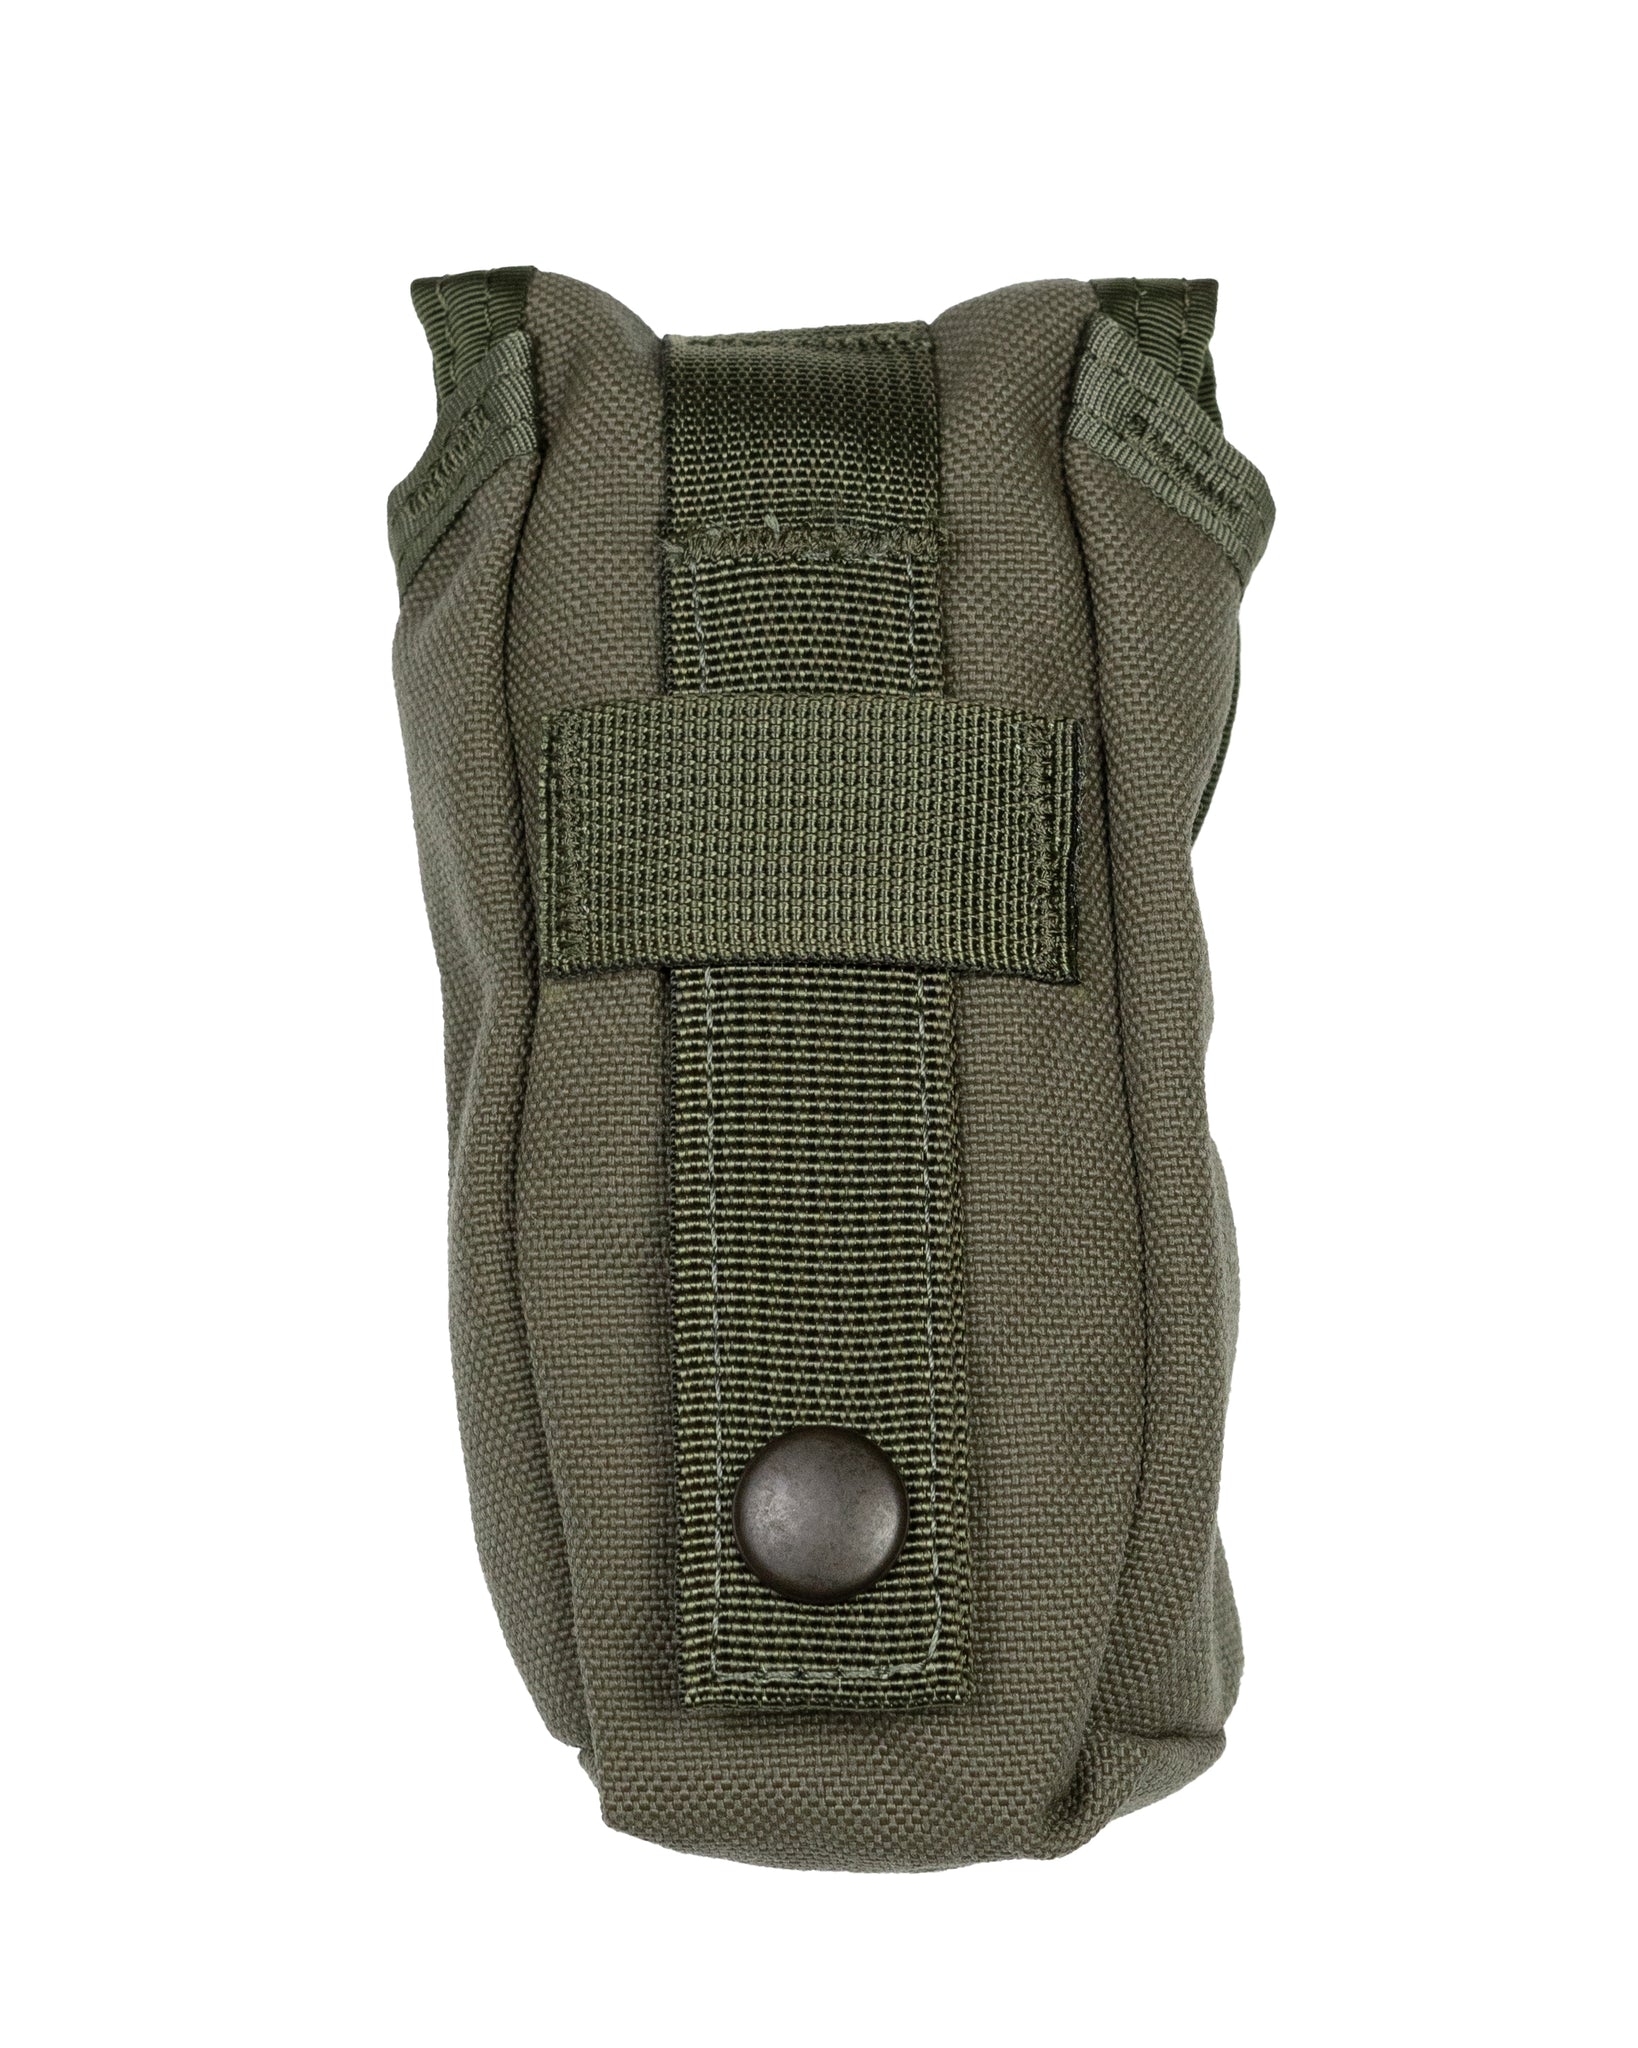 SOF® Tourniquet with Green TMS Outdoors Pouch